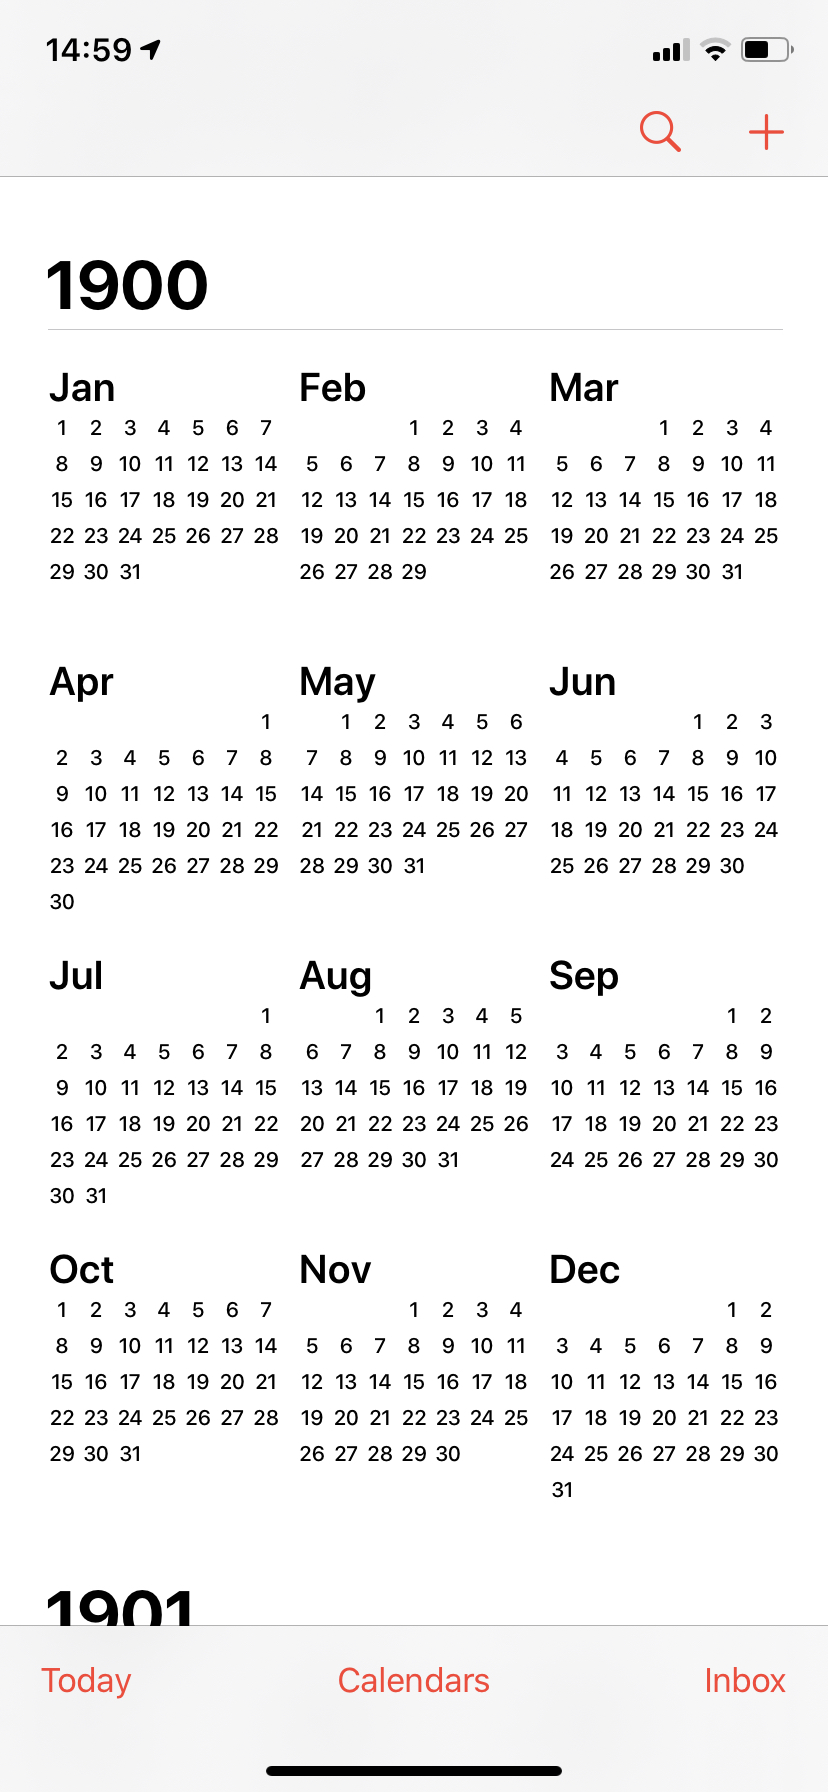 Screenshot of iOS
calendar app, showing the year view for the year 1900. February has 29 days, the
last of which is the same day of the week as the first of March.